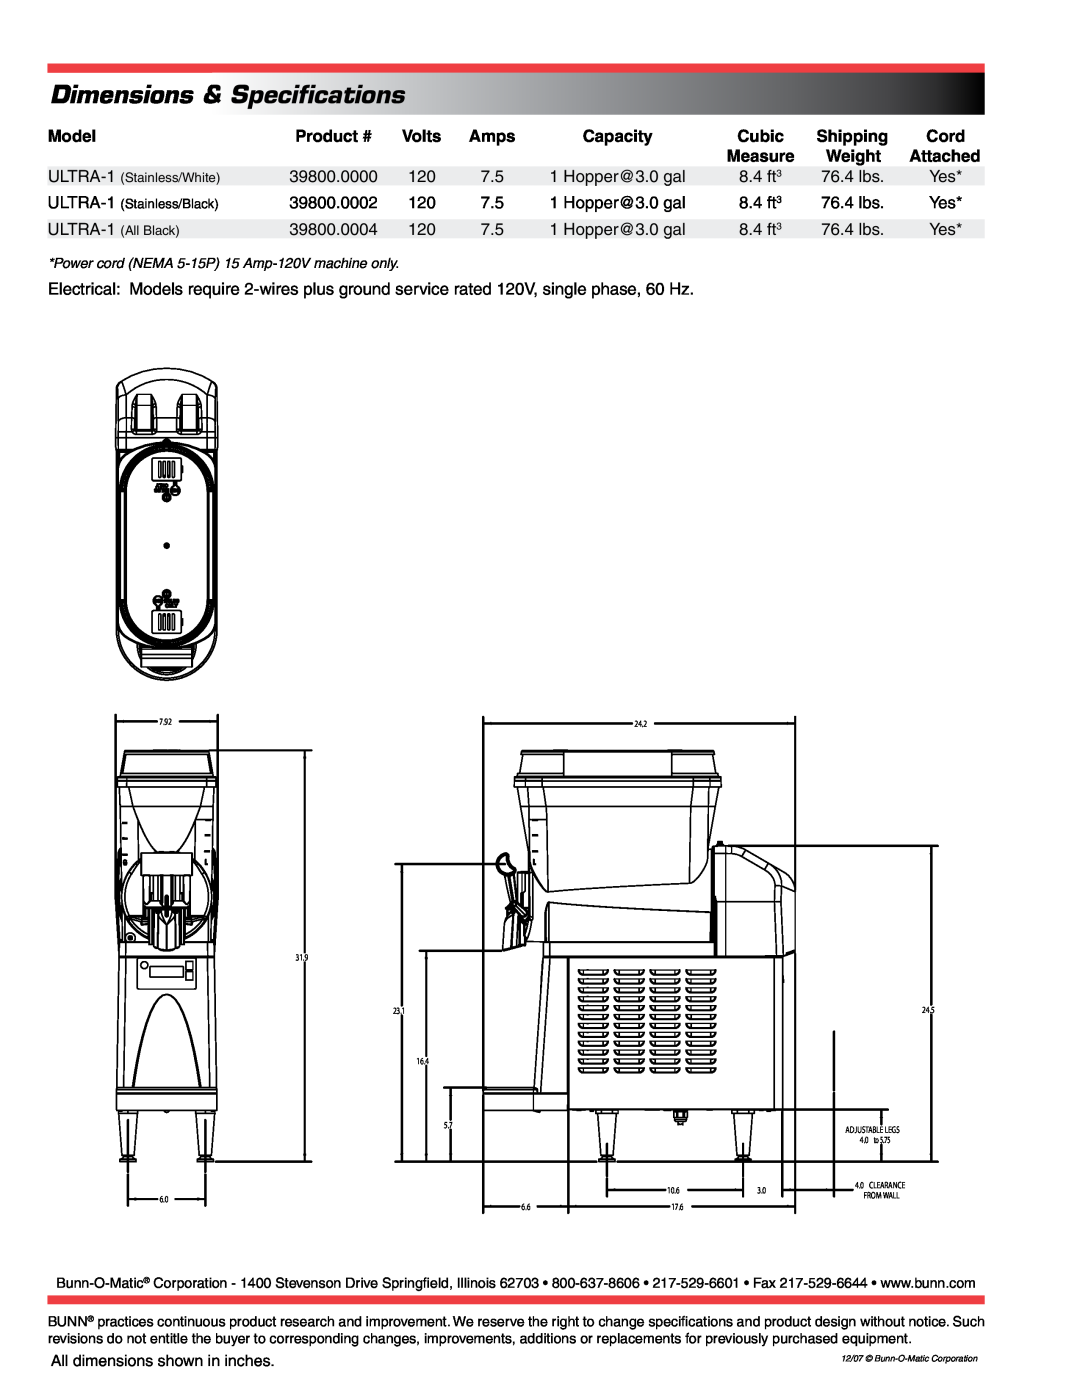 Bunn 1 Hopper specifications Amps, Dimensions & Specifications, Model 